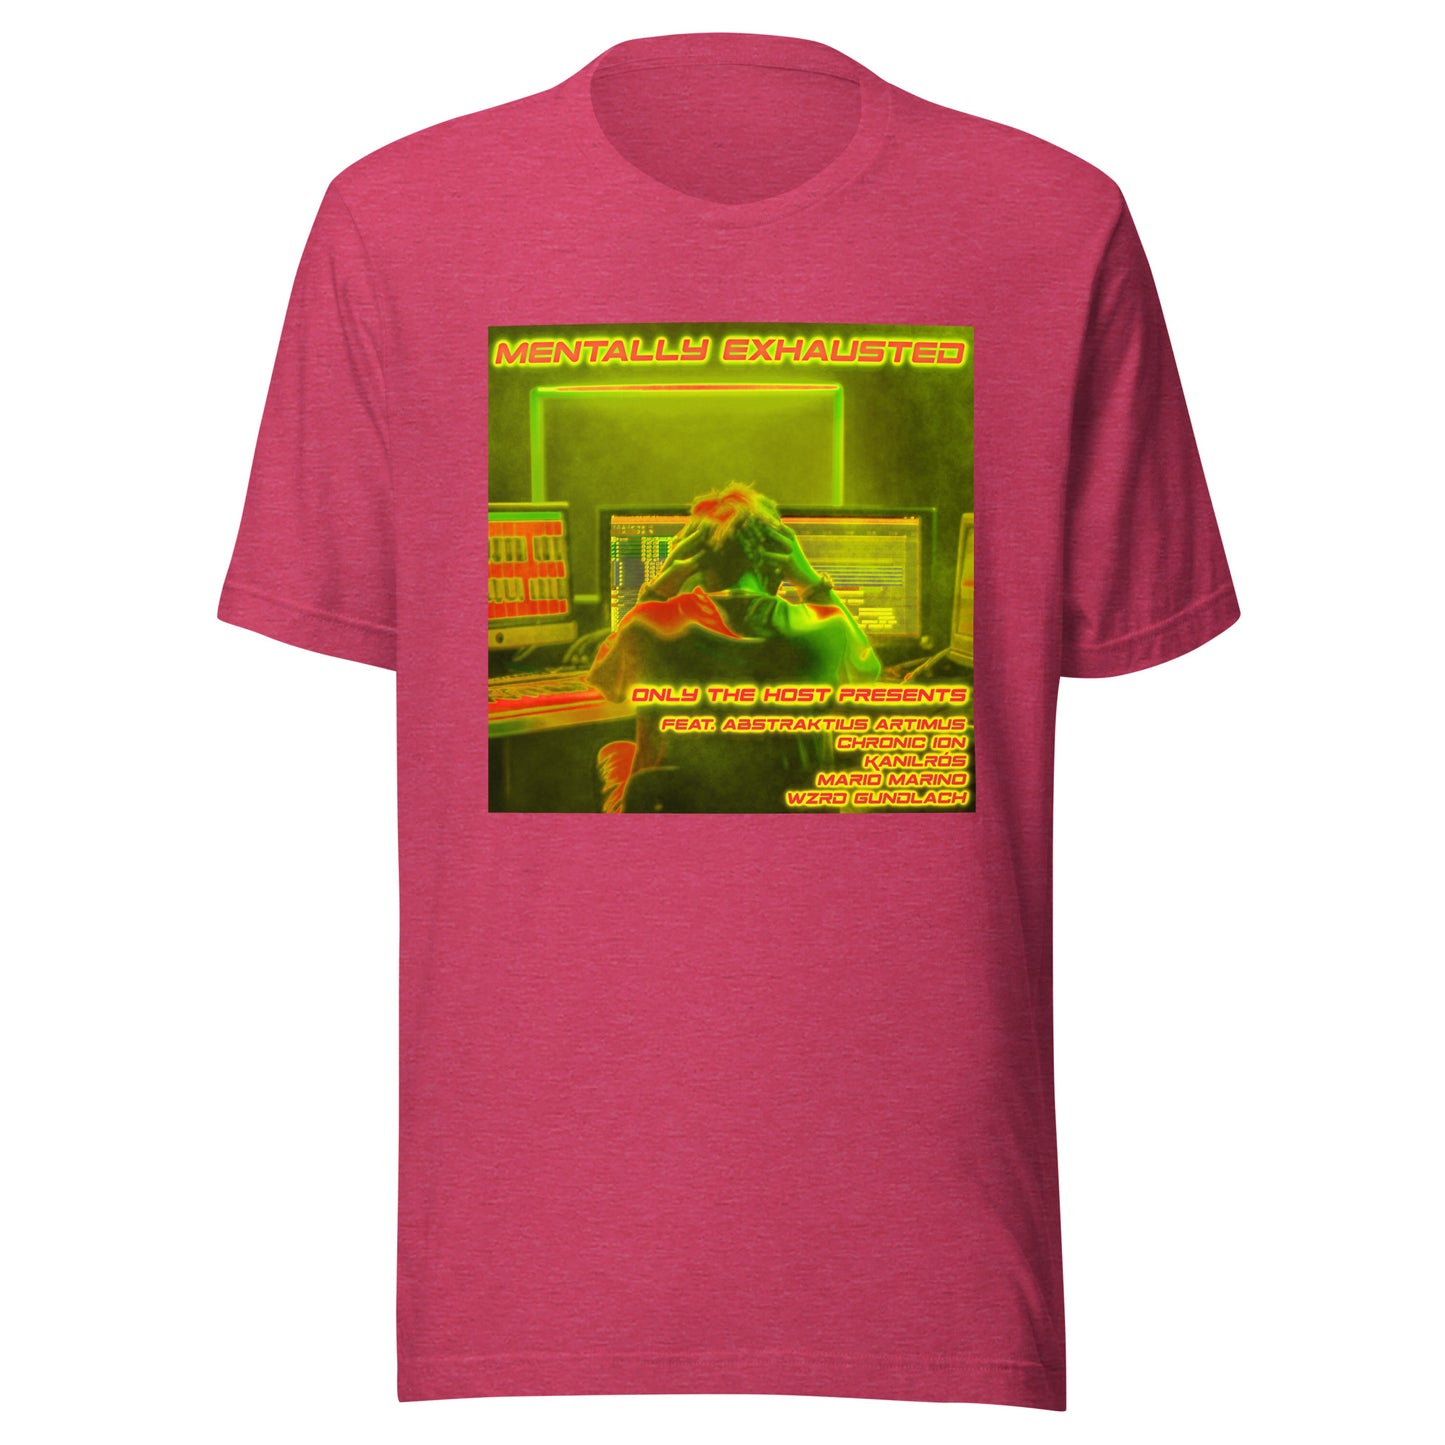 Only The Host Presents - Mentally Exhausted T-Shirt